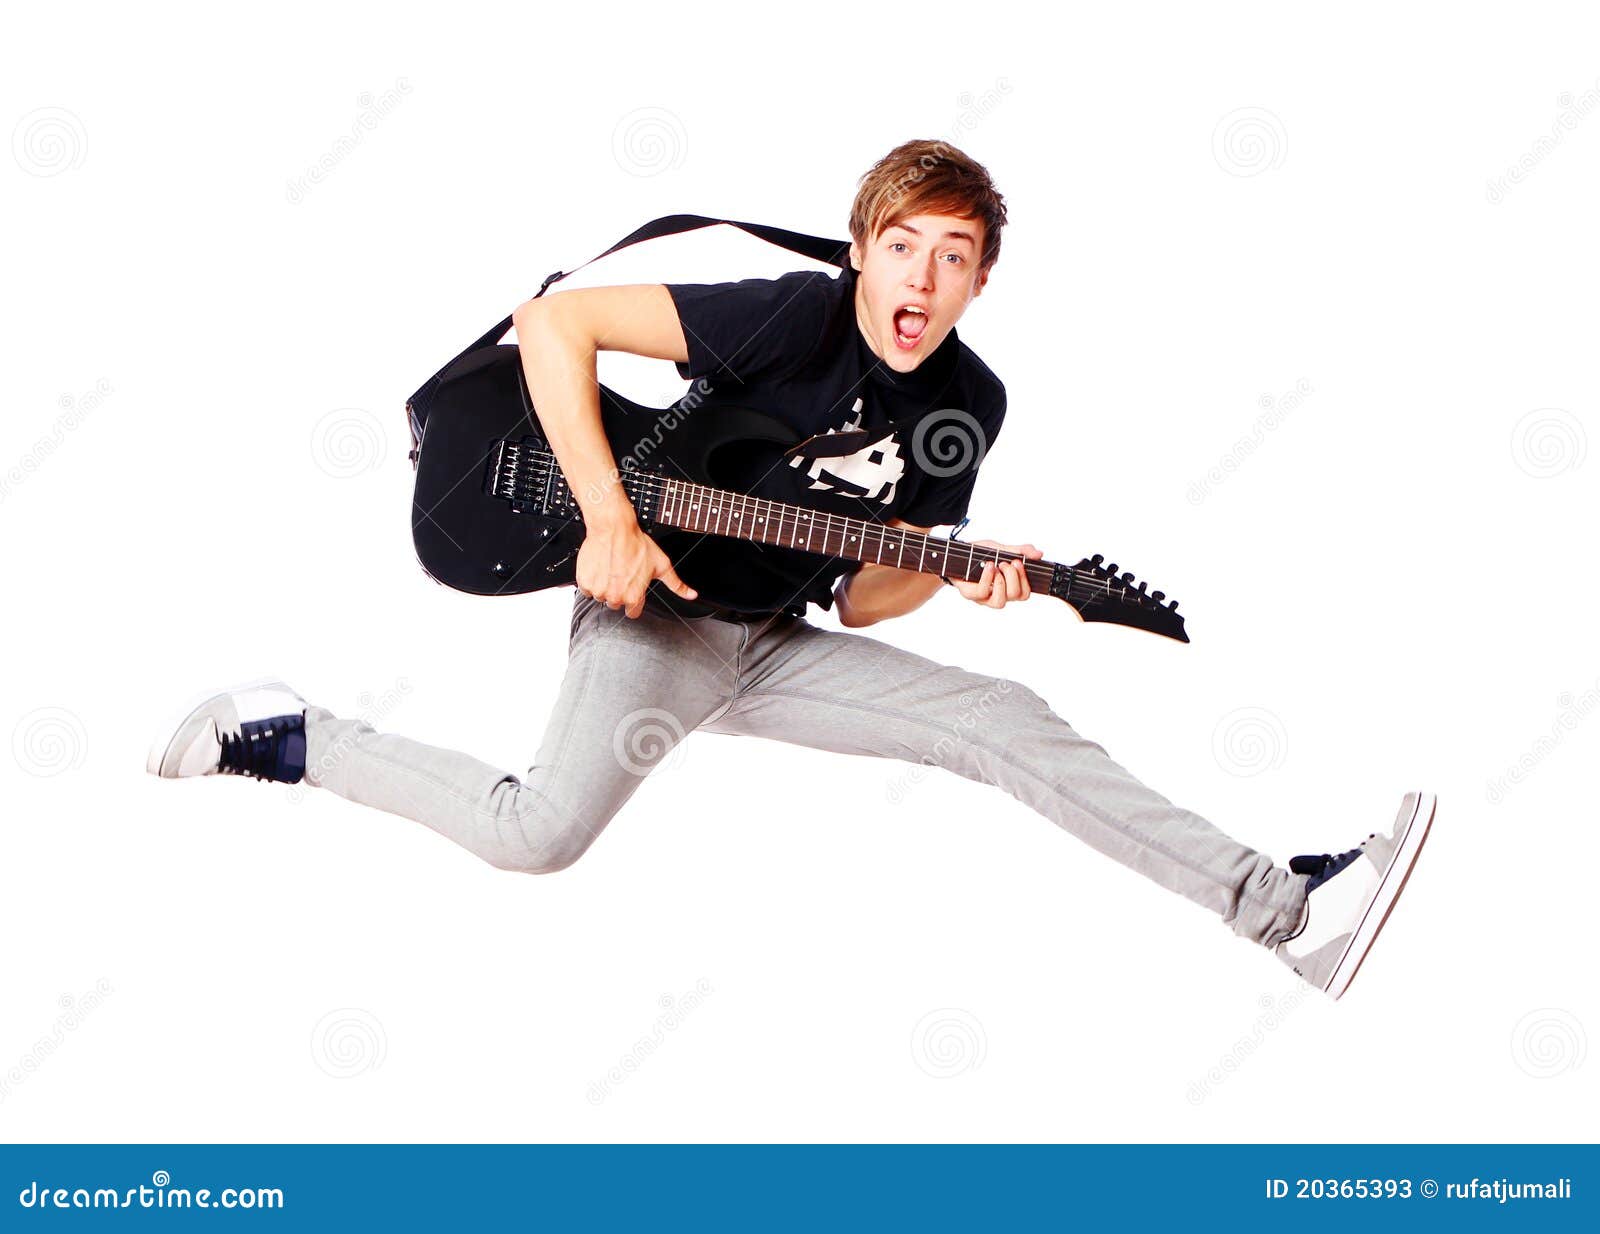 Young Teenager Jumping With Guitar Stock Image - Image 